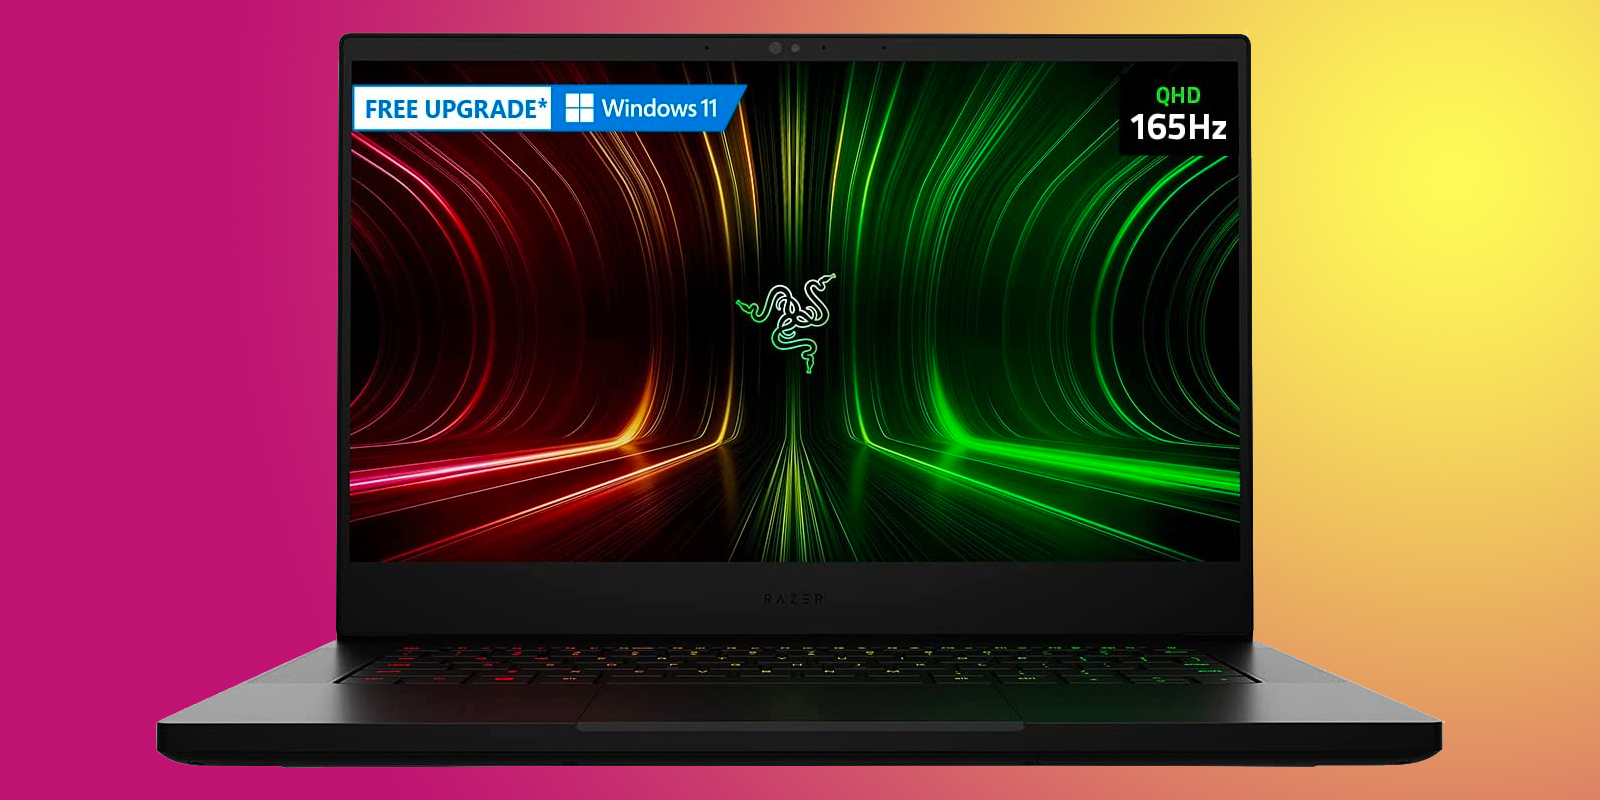 Crazy Deal From Razer This Black Friday Discounts RTX 3080 Ti Gaming Laptop  By $1,700